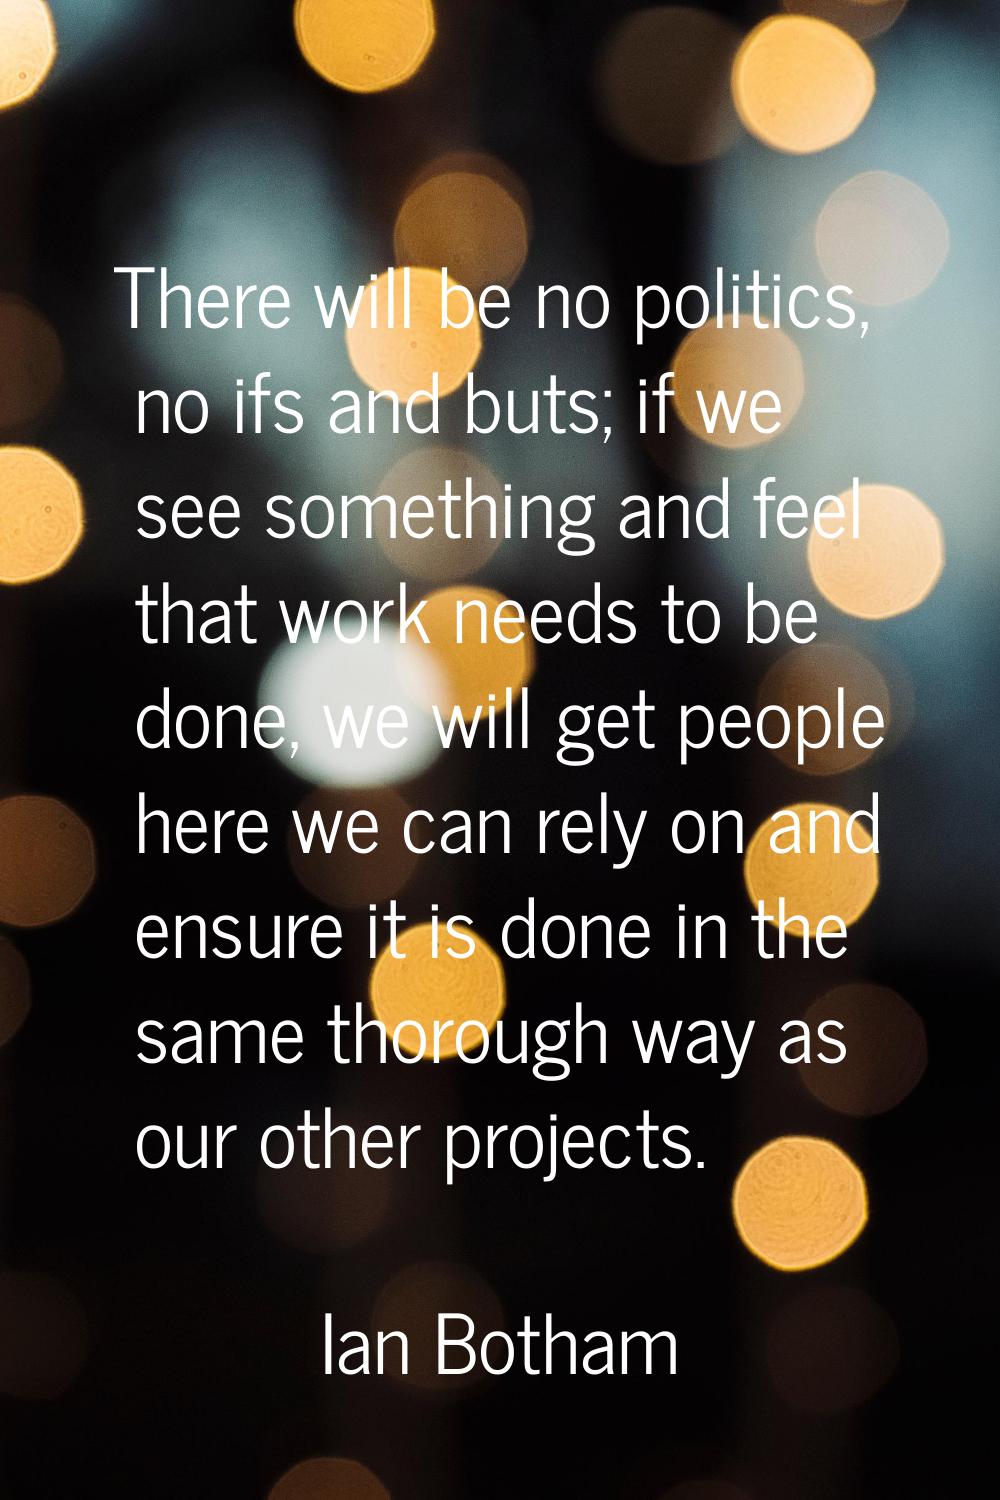 There will be no politics, no ifs and buts; if we see something and feel that work needs to be done